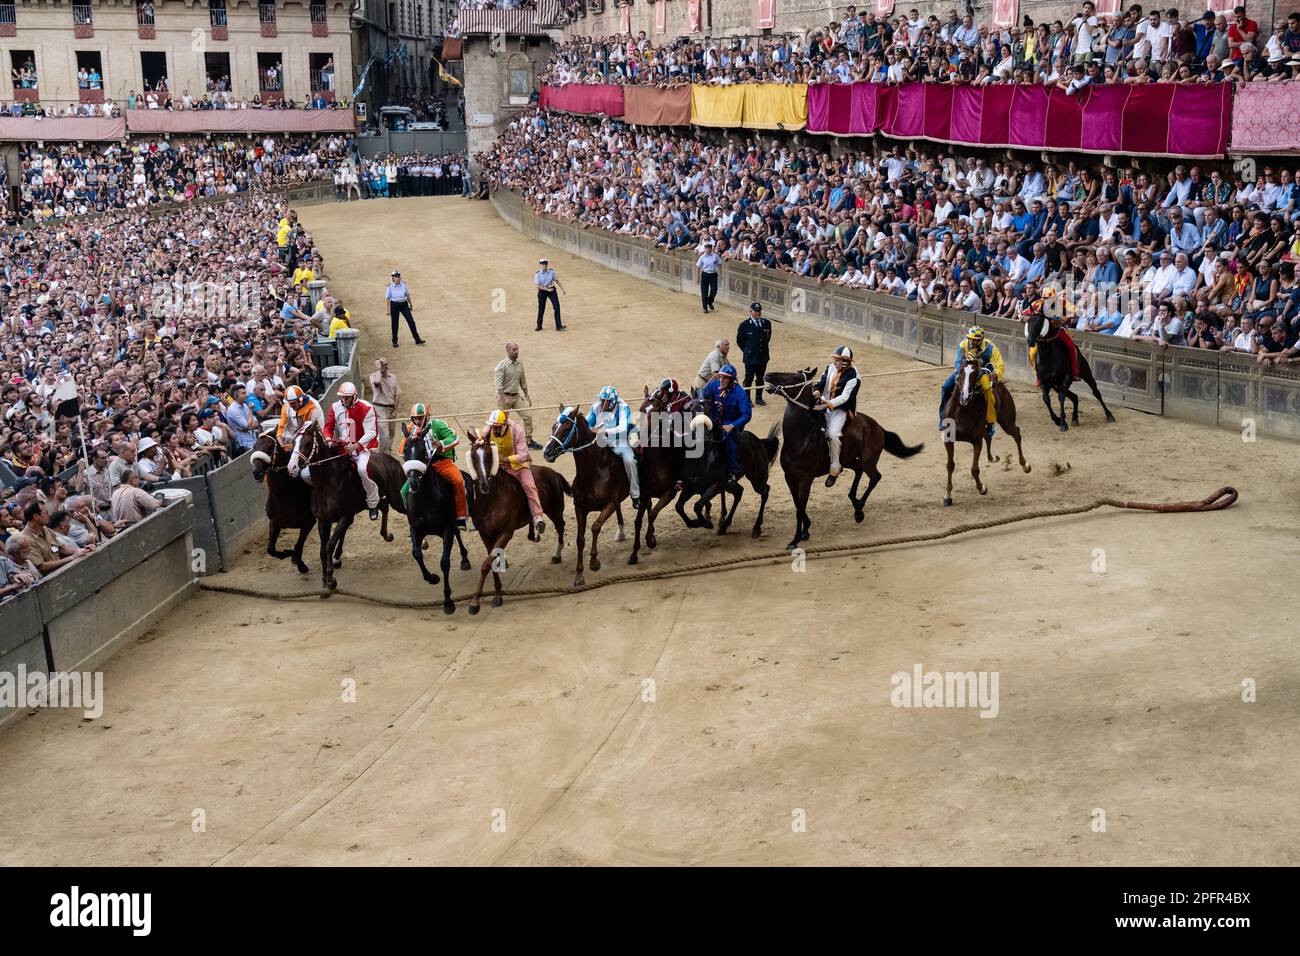 Siena, Italy - August 17 2021: Mossa or Start of the Public Horse Race Palio di Siena on the Main Square Stock Photo